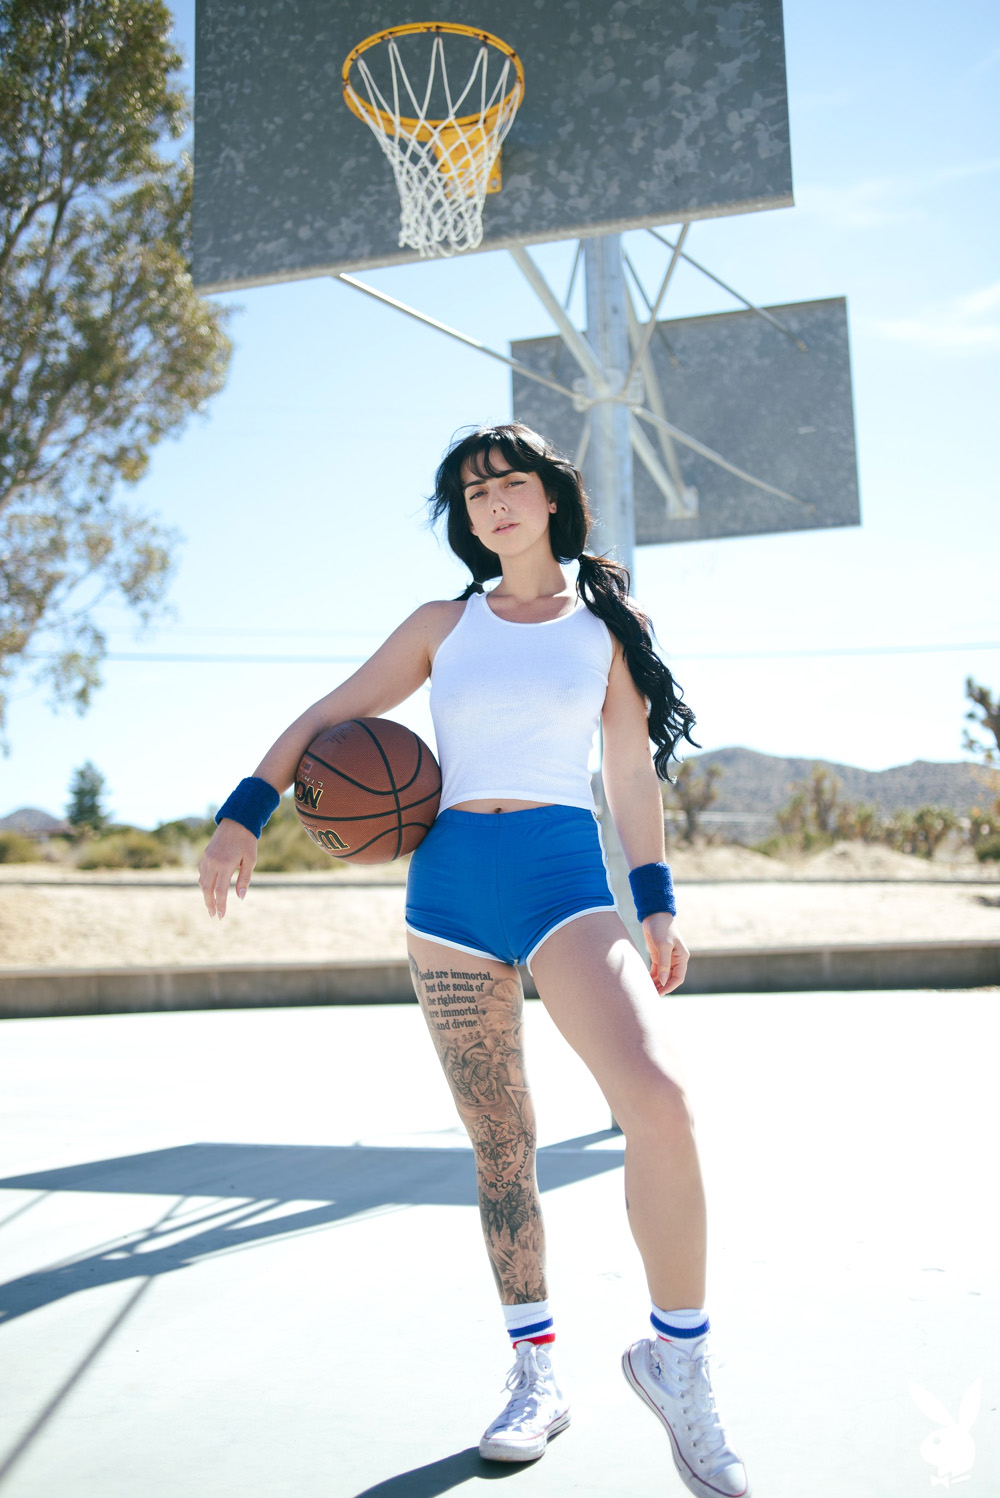 Reed exposes her sexy curves on the basketball court